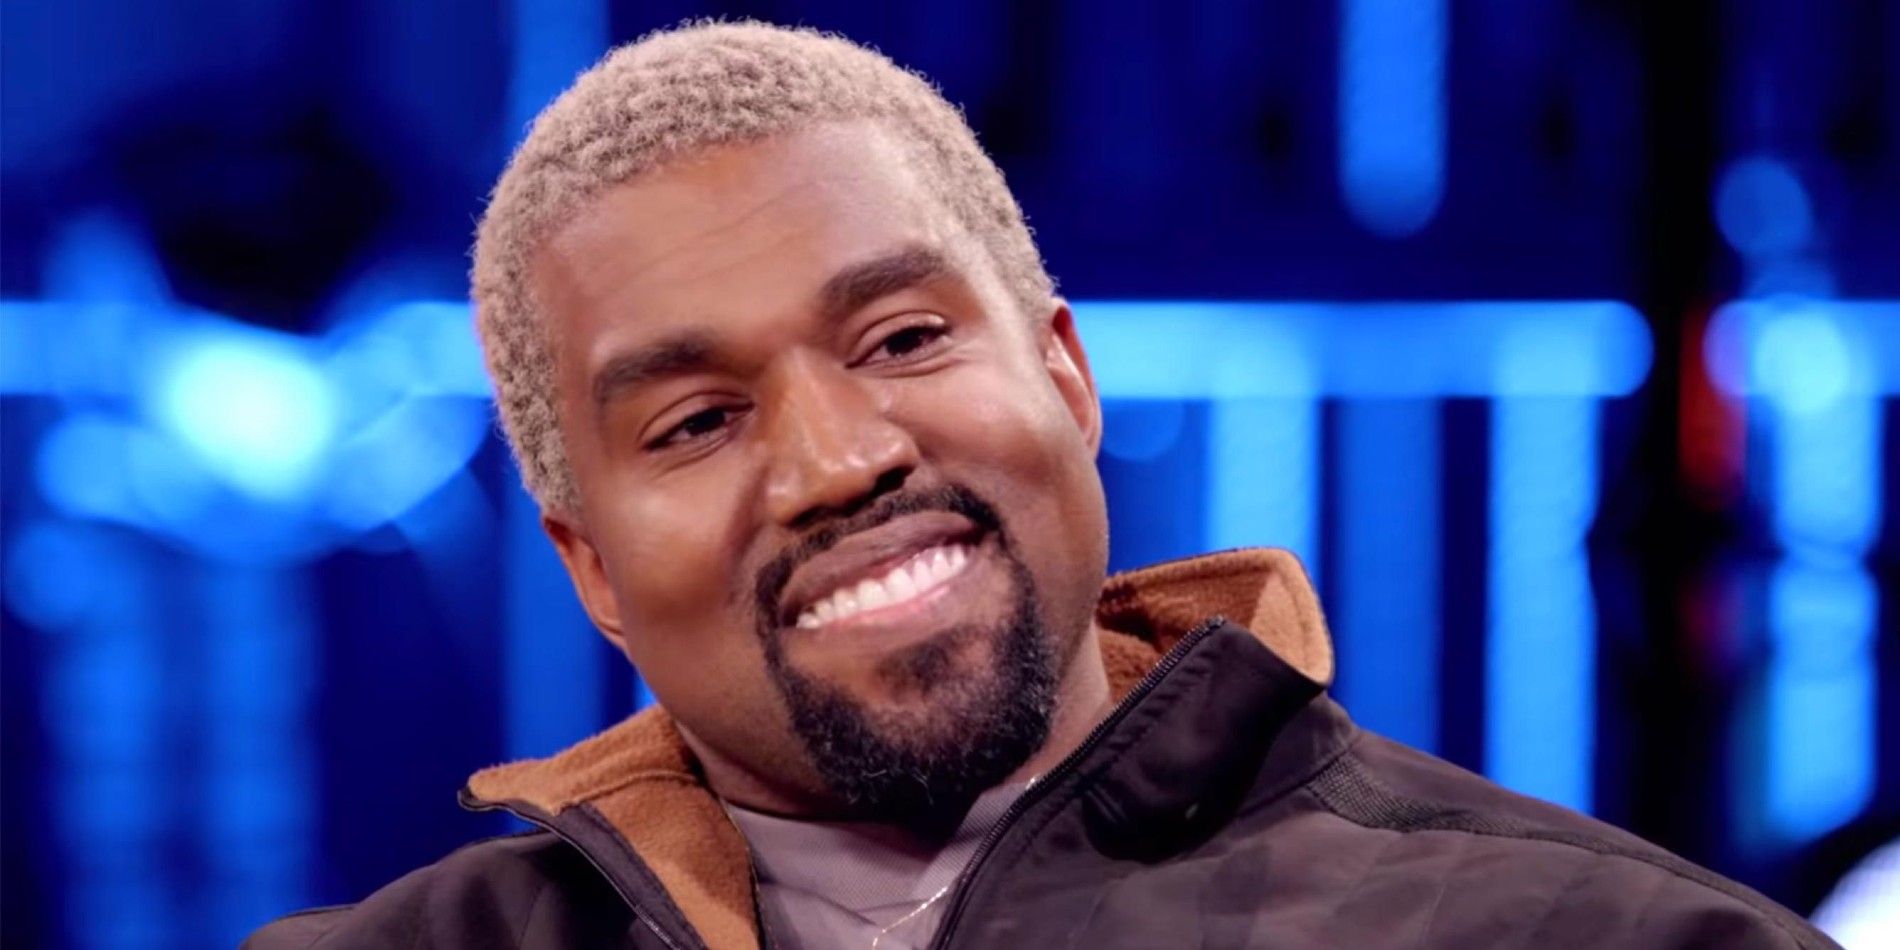 Kanye West smiling during a talk show appearance